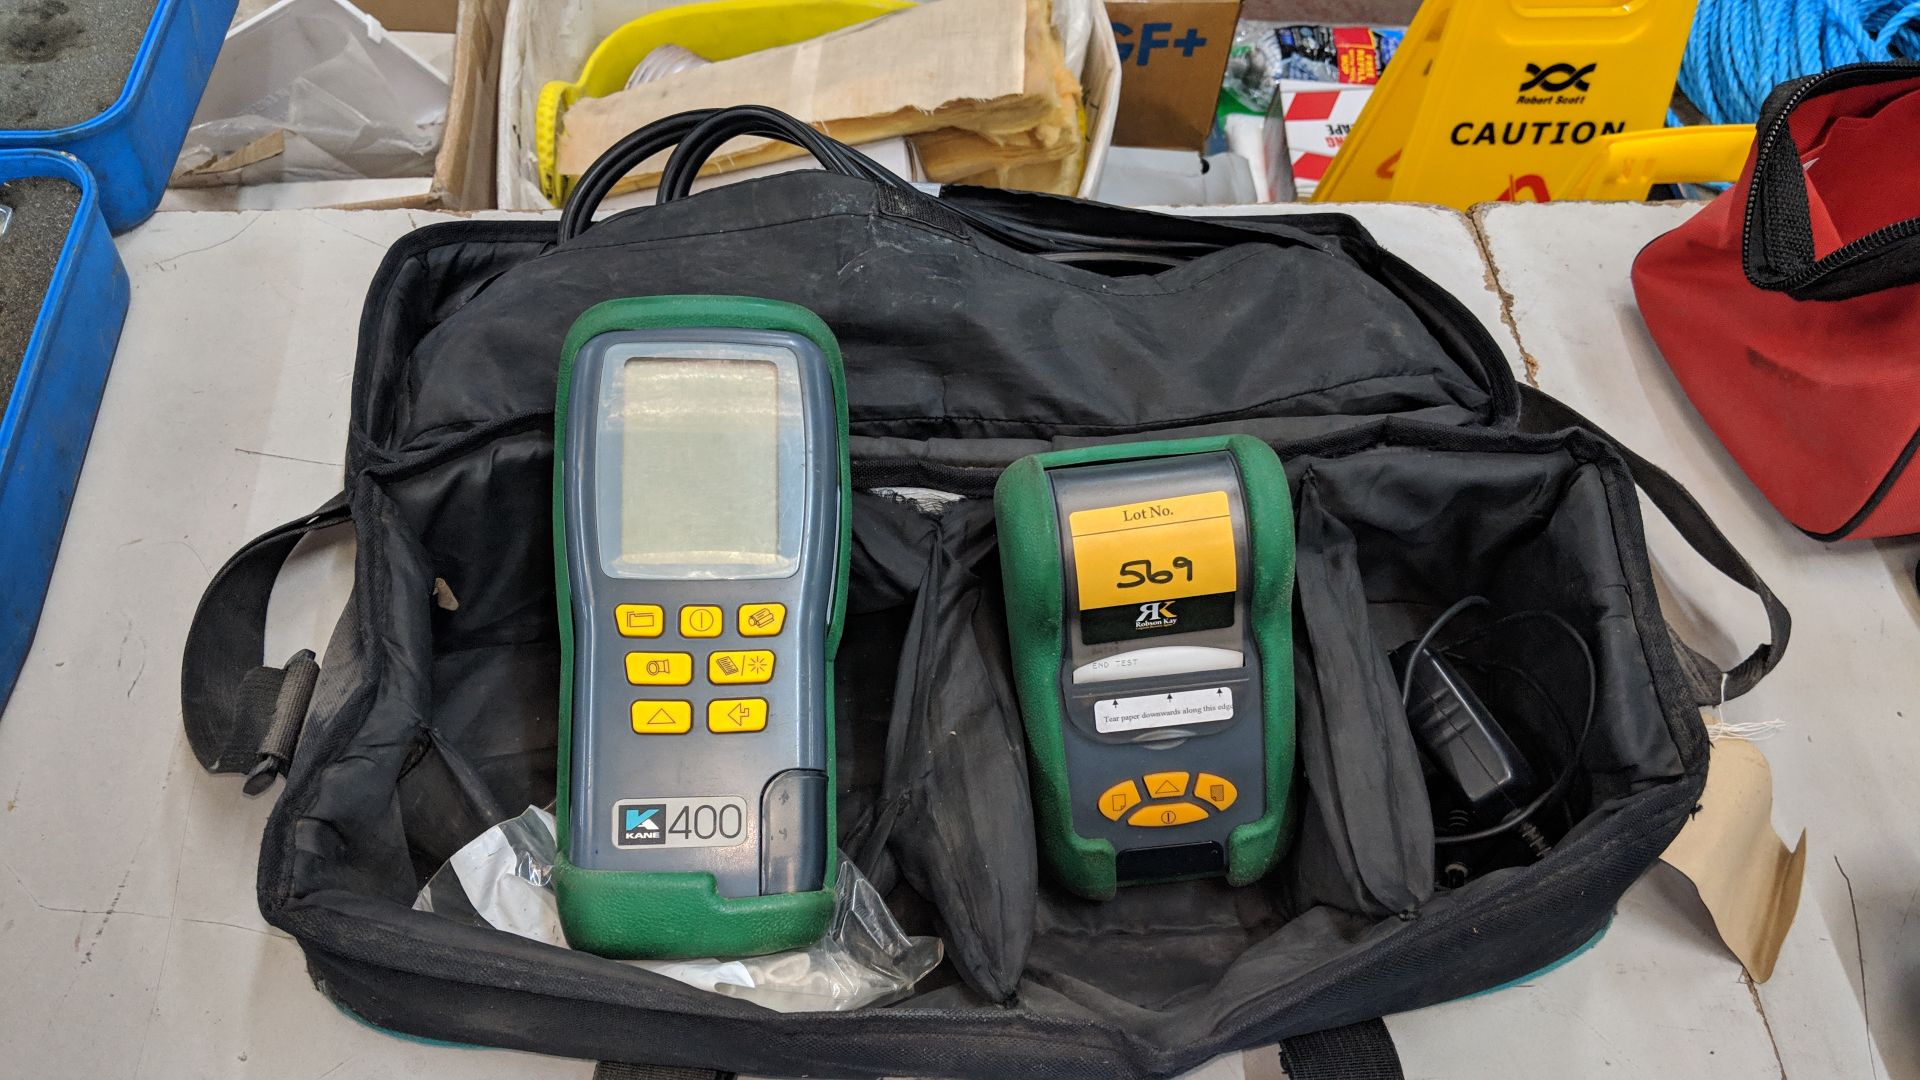 Kane 400 combustion flue gas analyser including accessories, printer and carry case This is one of a - Image 2 of 5